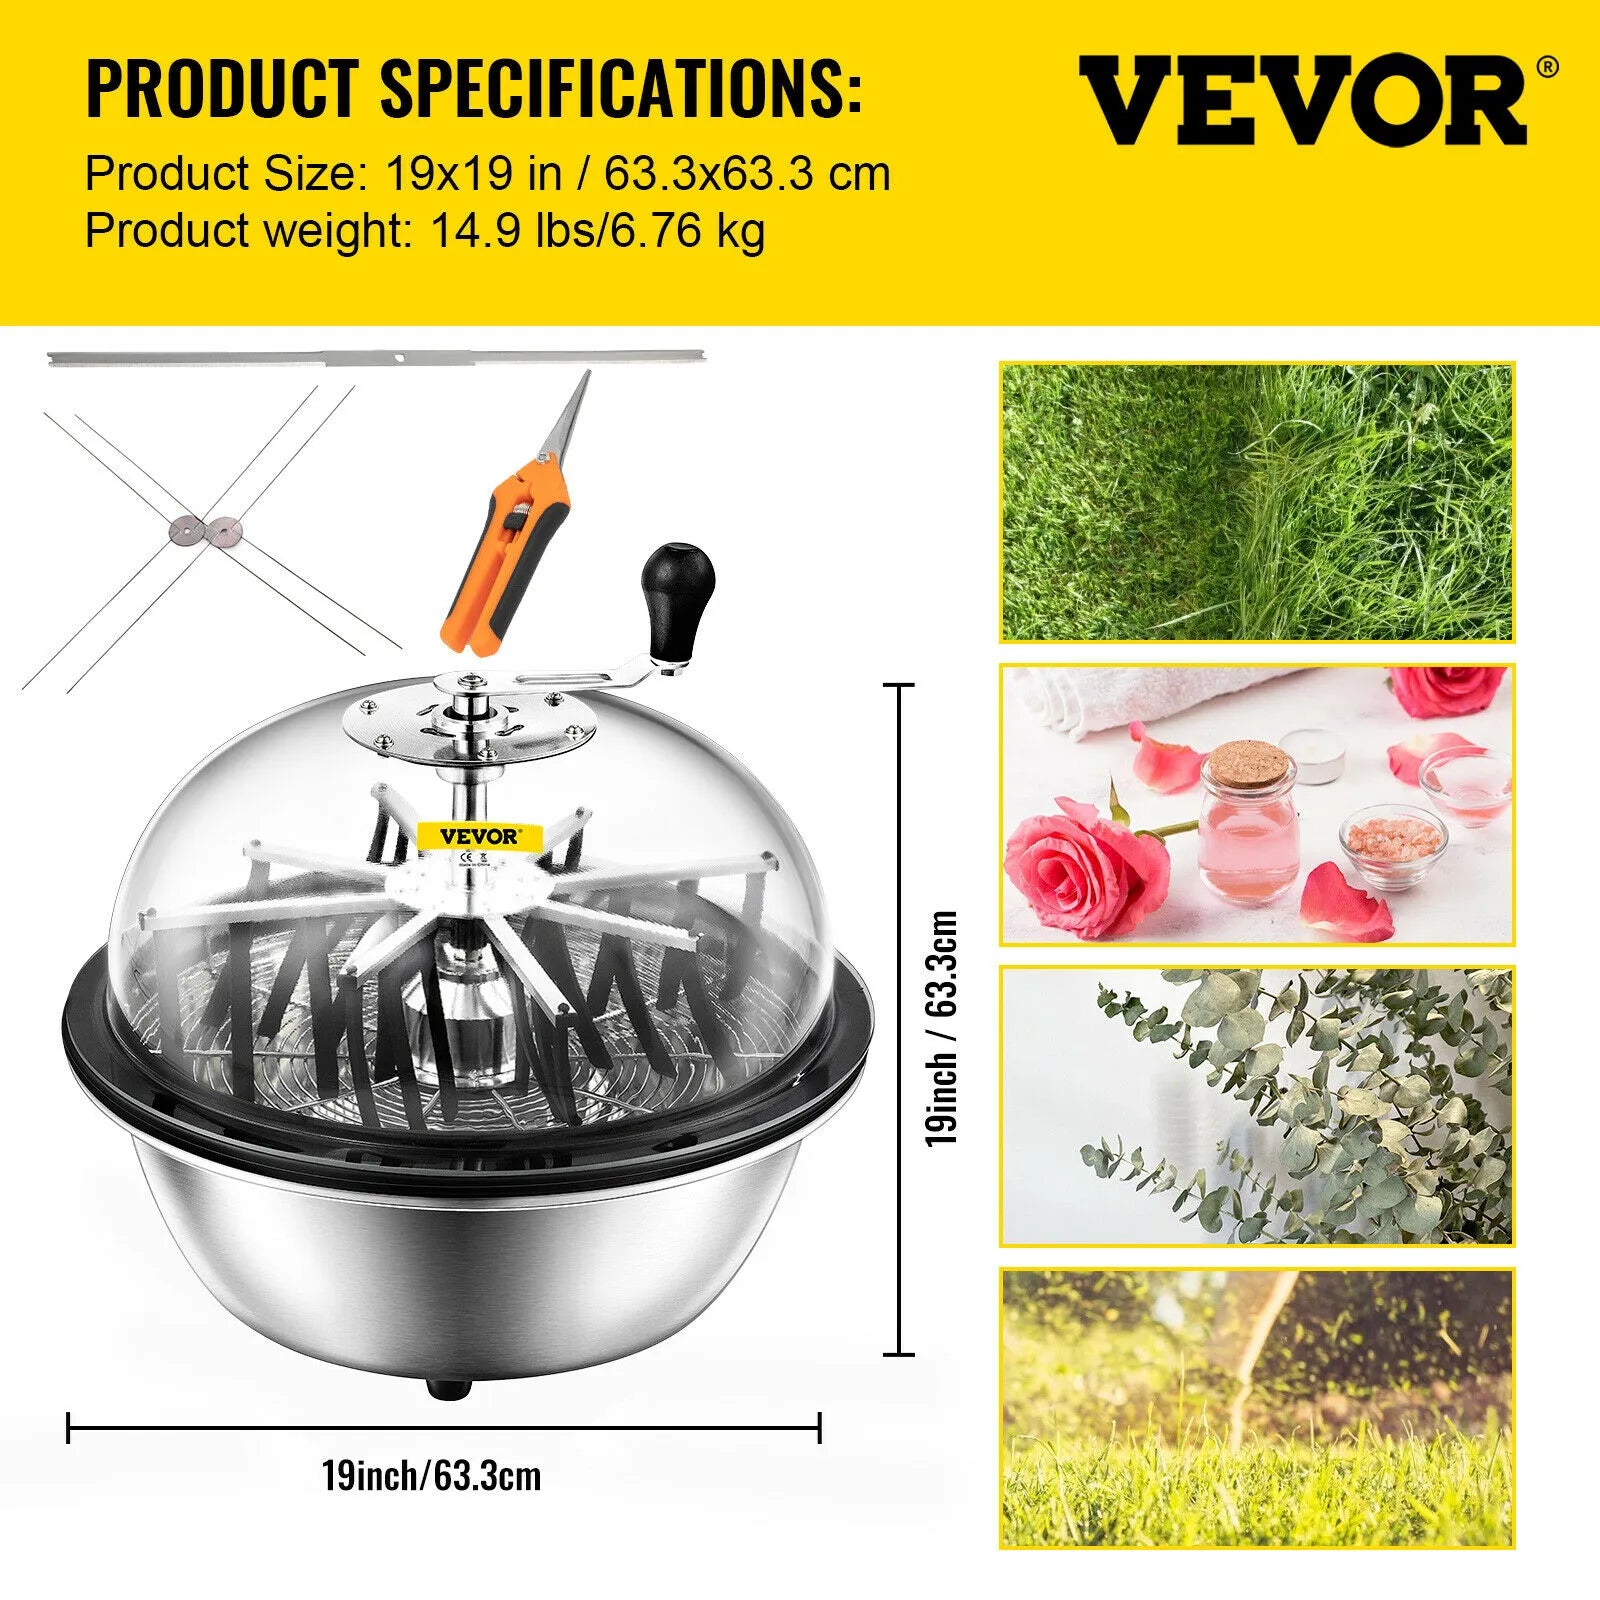 VEVOR Hydroponic Leaf Bowl Leaf Trimmer 16 19 24 Inch Twisted Spin Cut Garden Tools For Plant Bud Leaf Trimmer And Herbal Making - Premium  from Yard Agri Supply - Just $284.95! Shop now at Yard Agri Supply